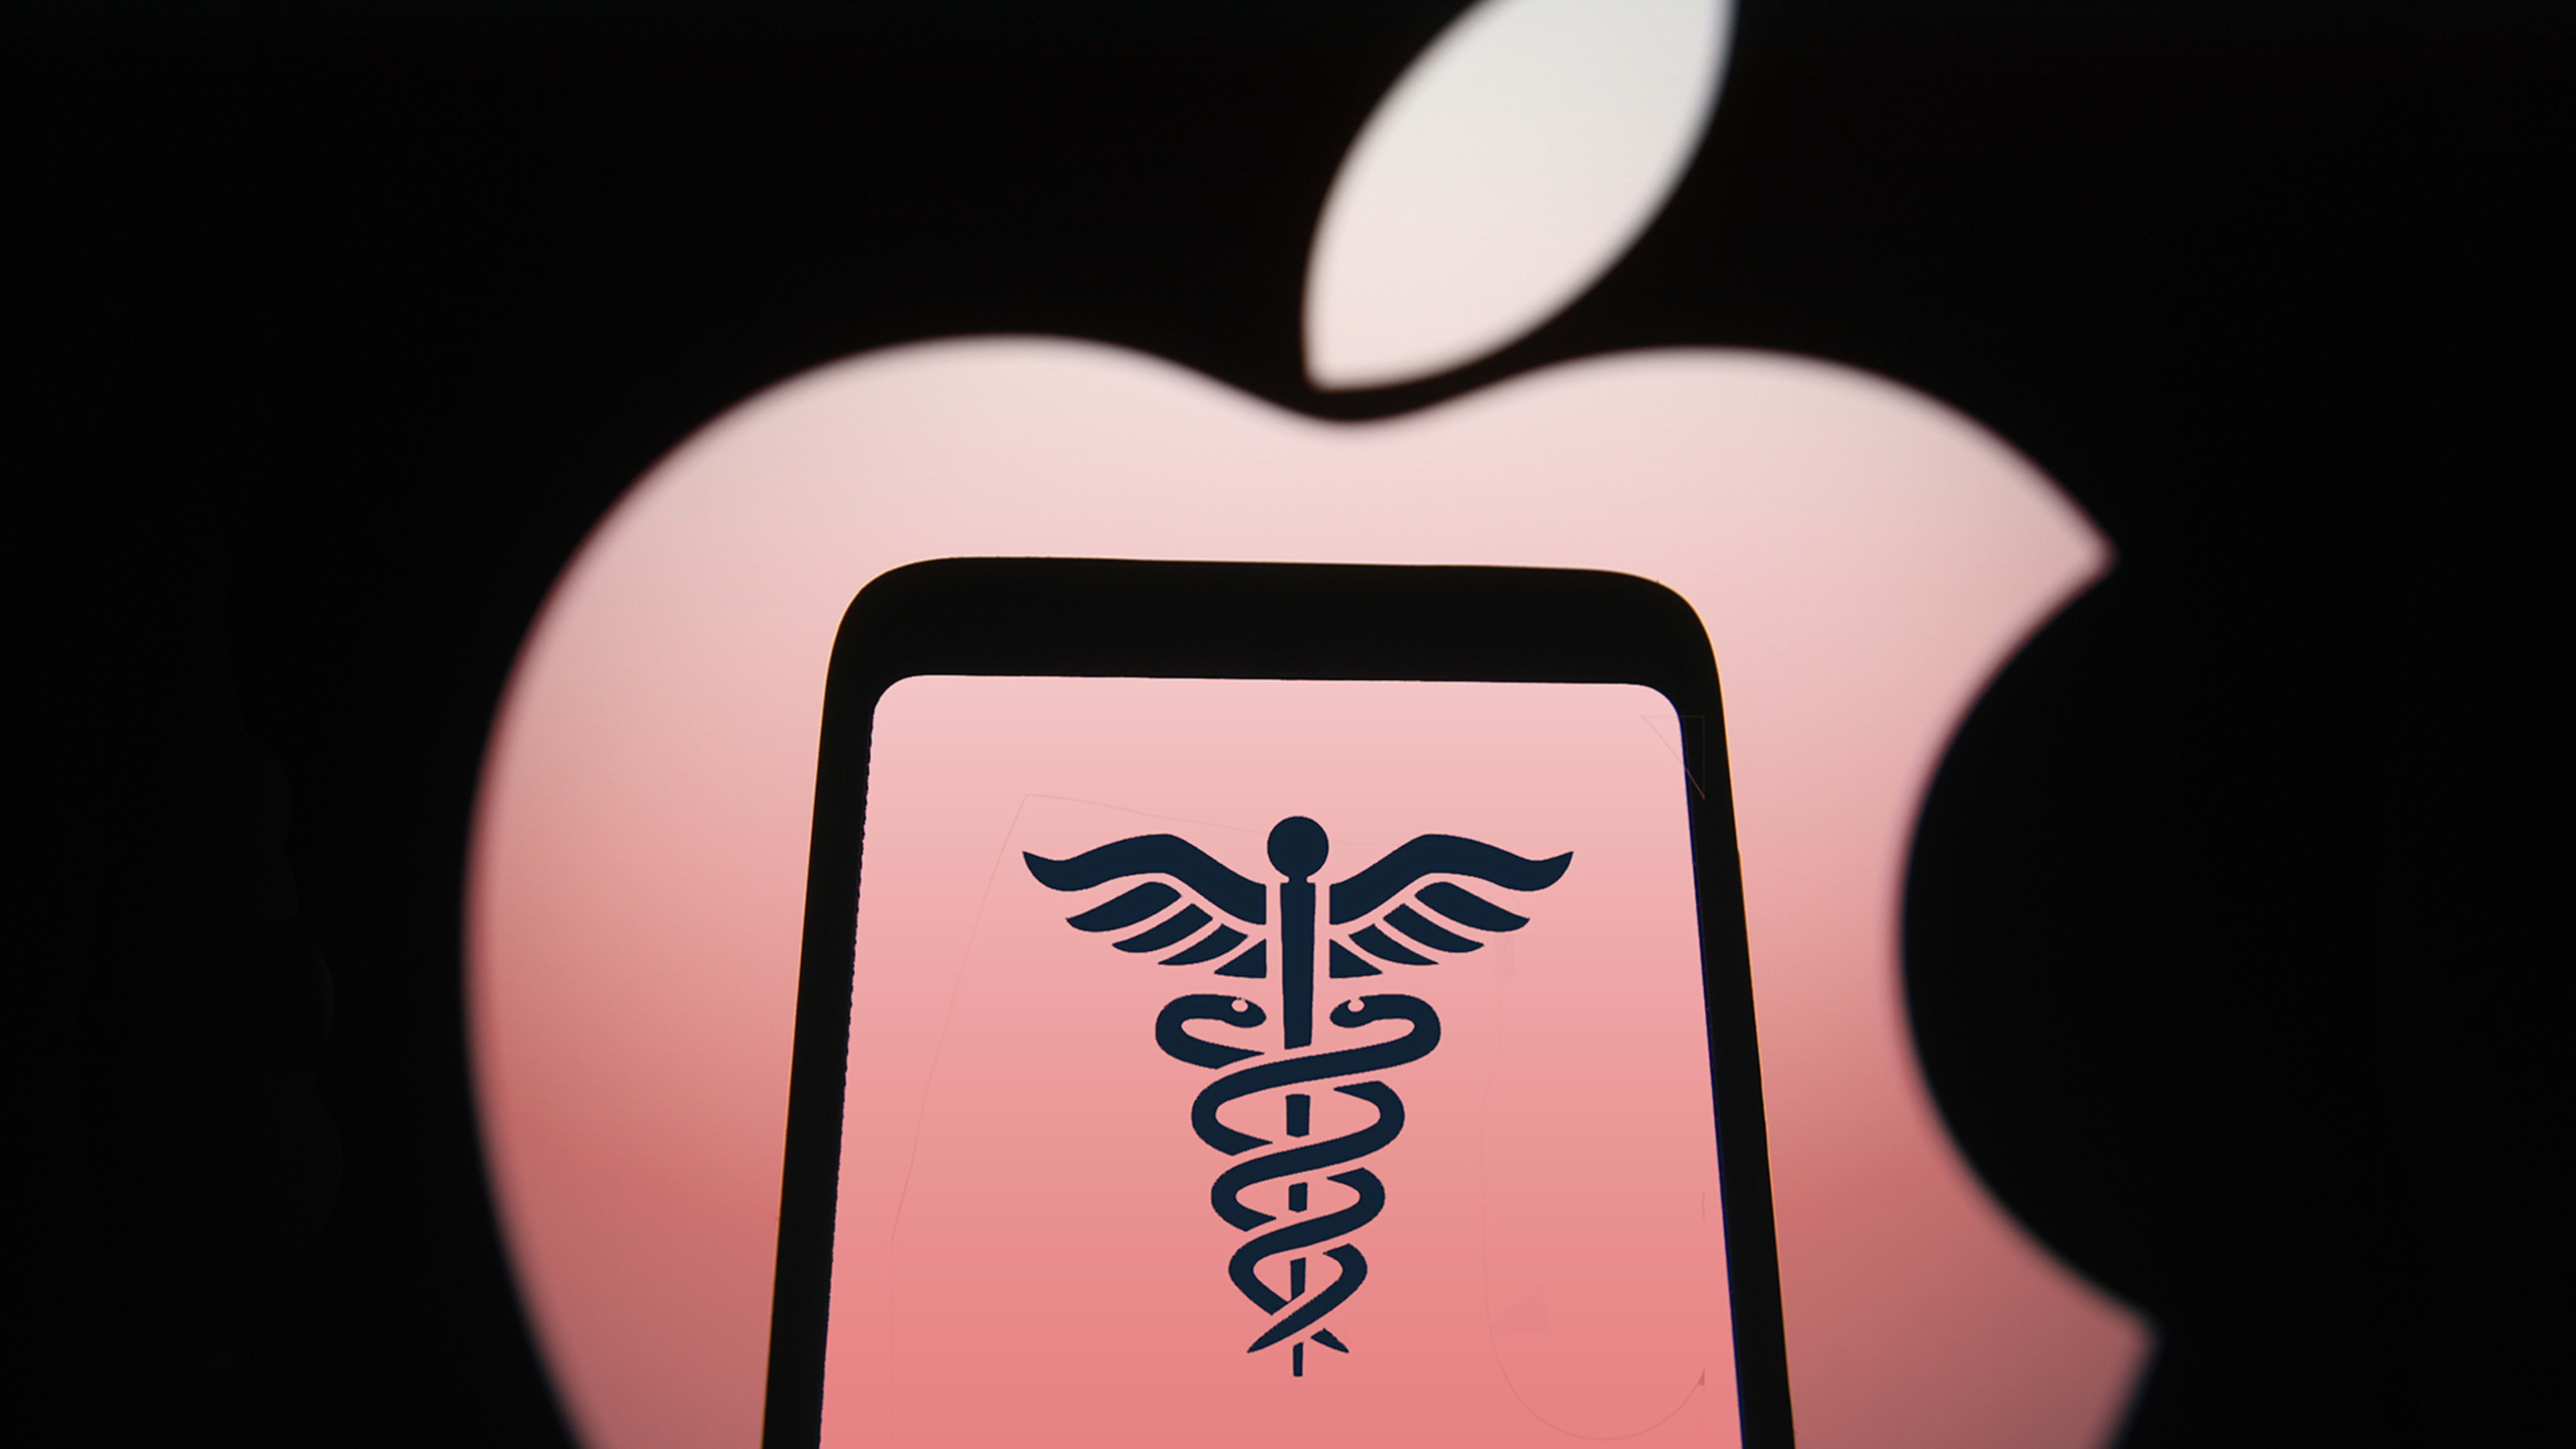 Apple considered launching its own healthcare service complete with ‘Apple doctors’